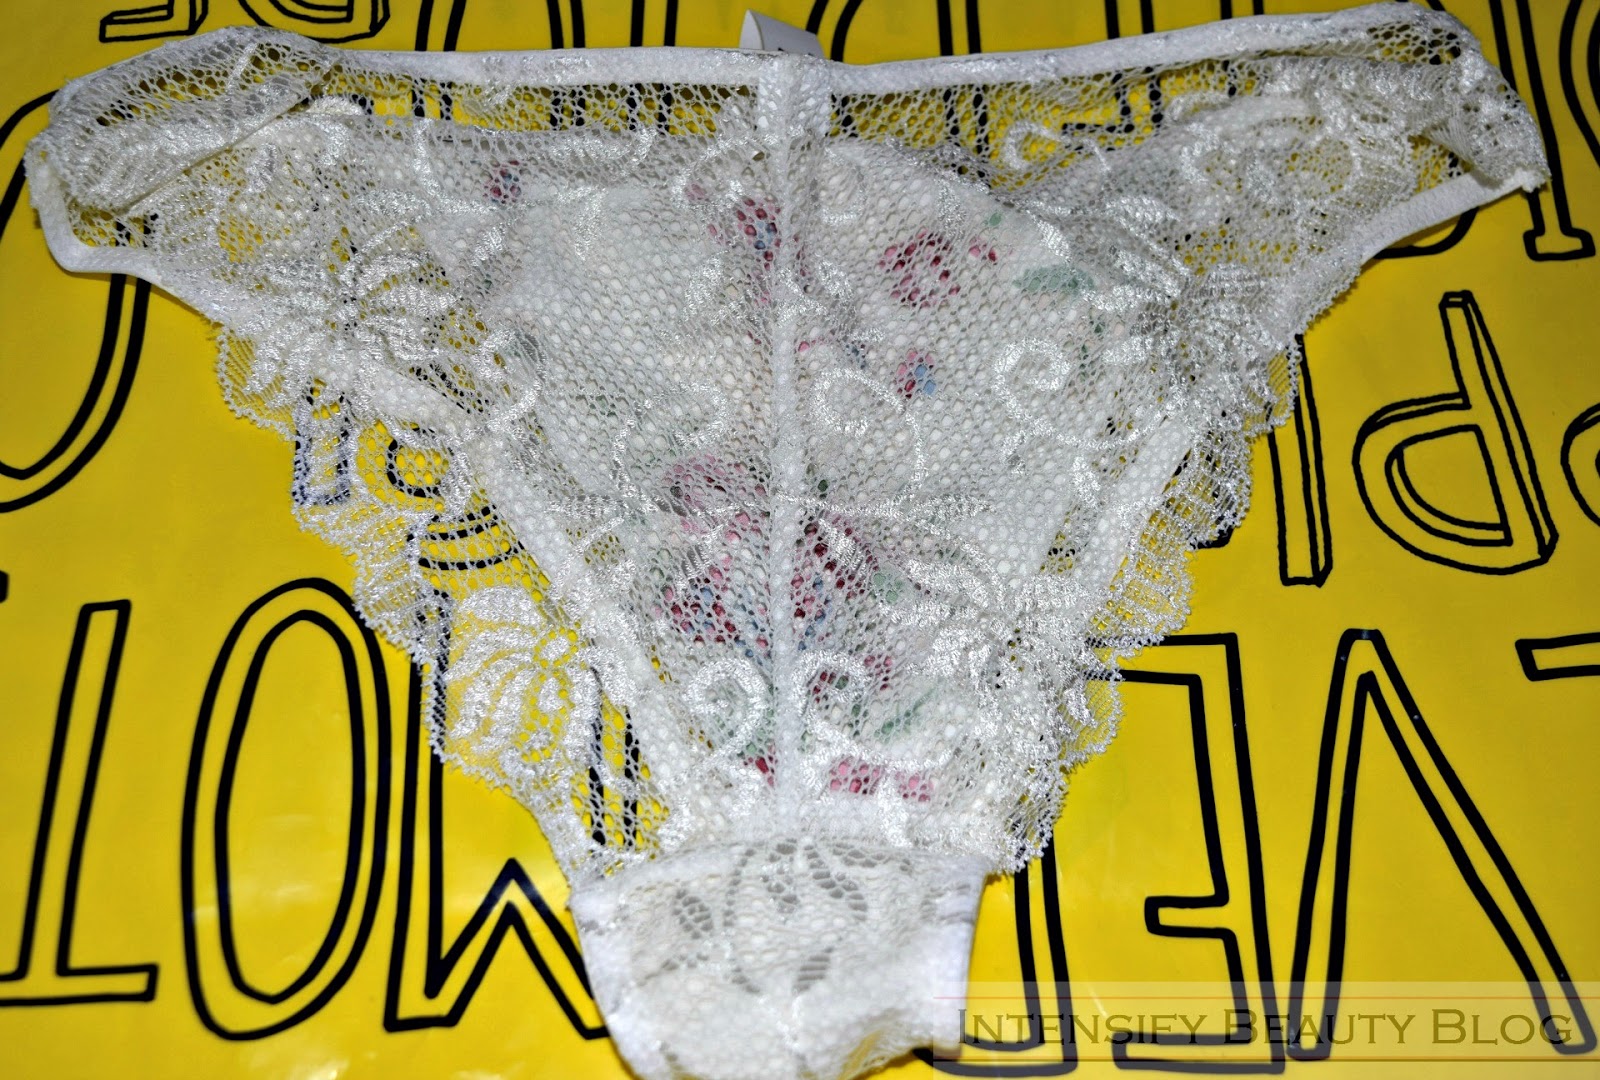 |Review|: A Bitter Lingerie Experience from Hebe - Myra Voices!